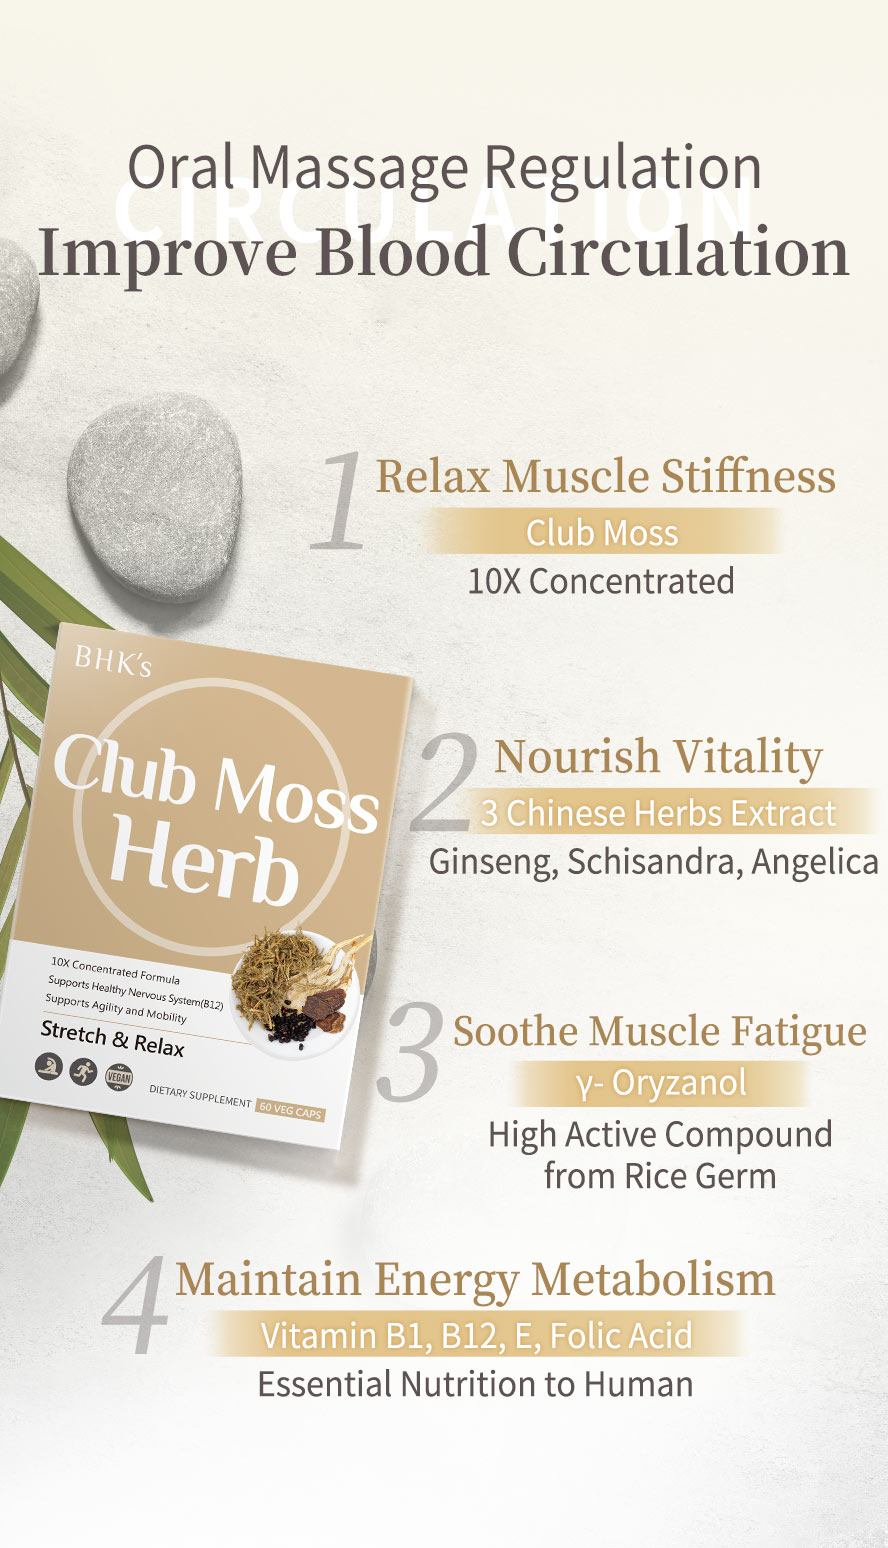 BHK's Club Moss Capsules can improve blood cicurlation to relax muscle stiffness and nourish vitality